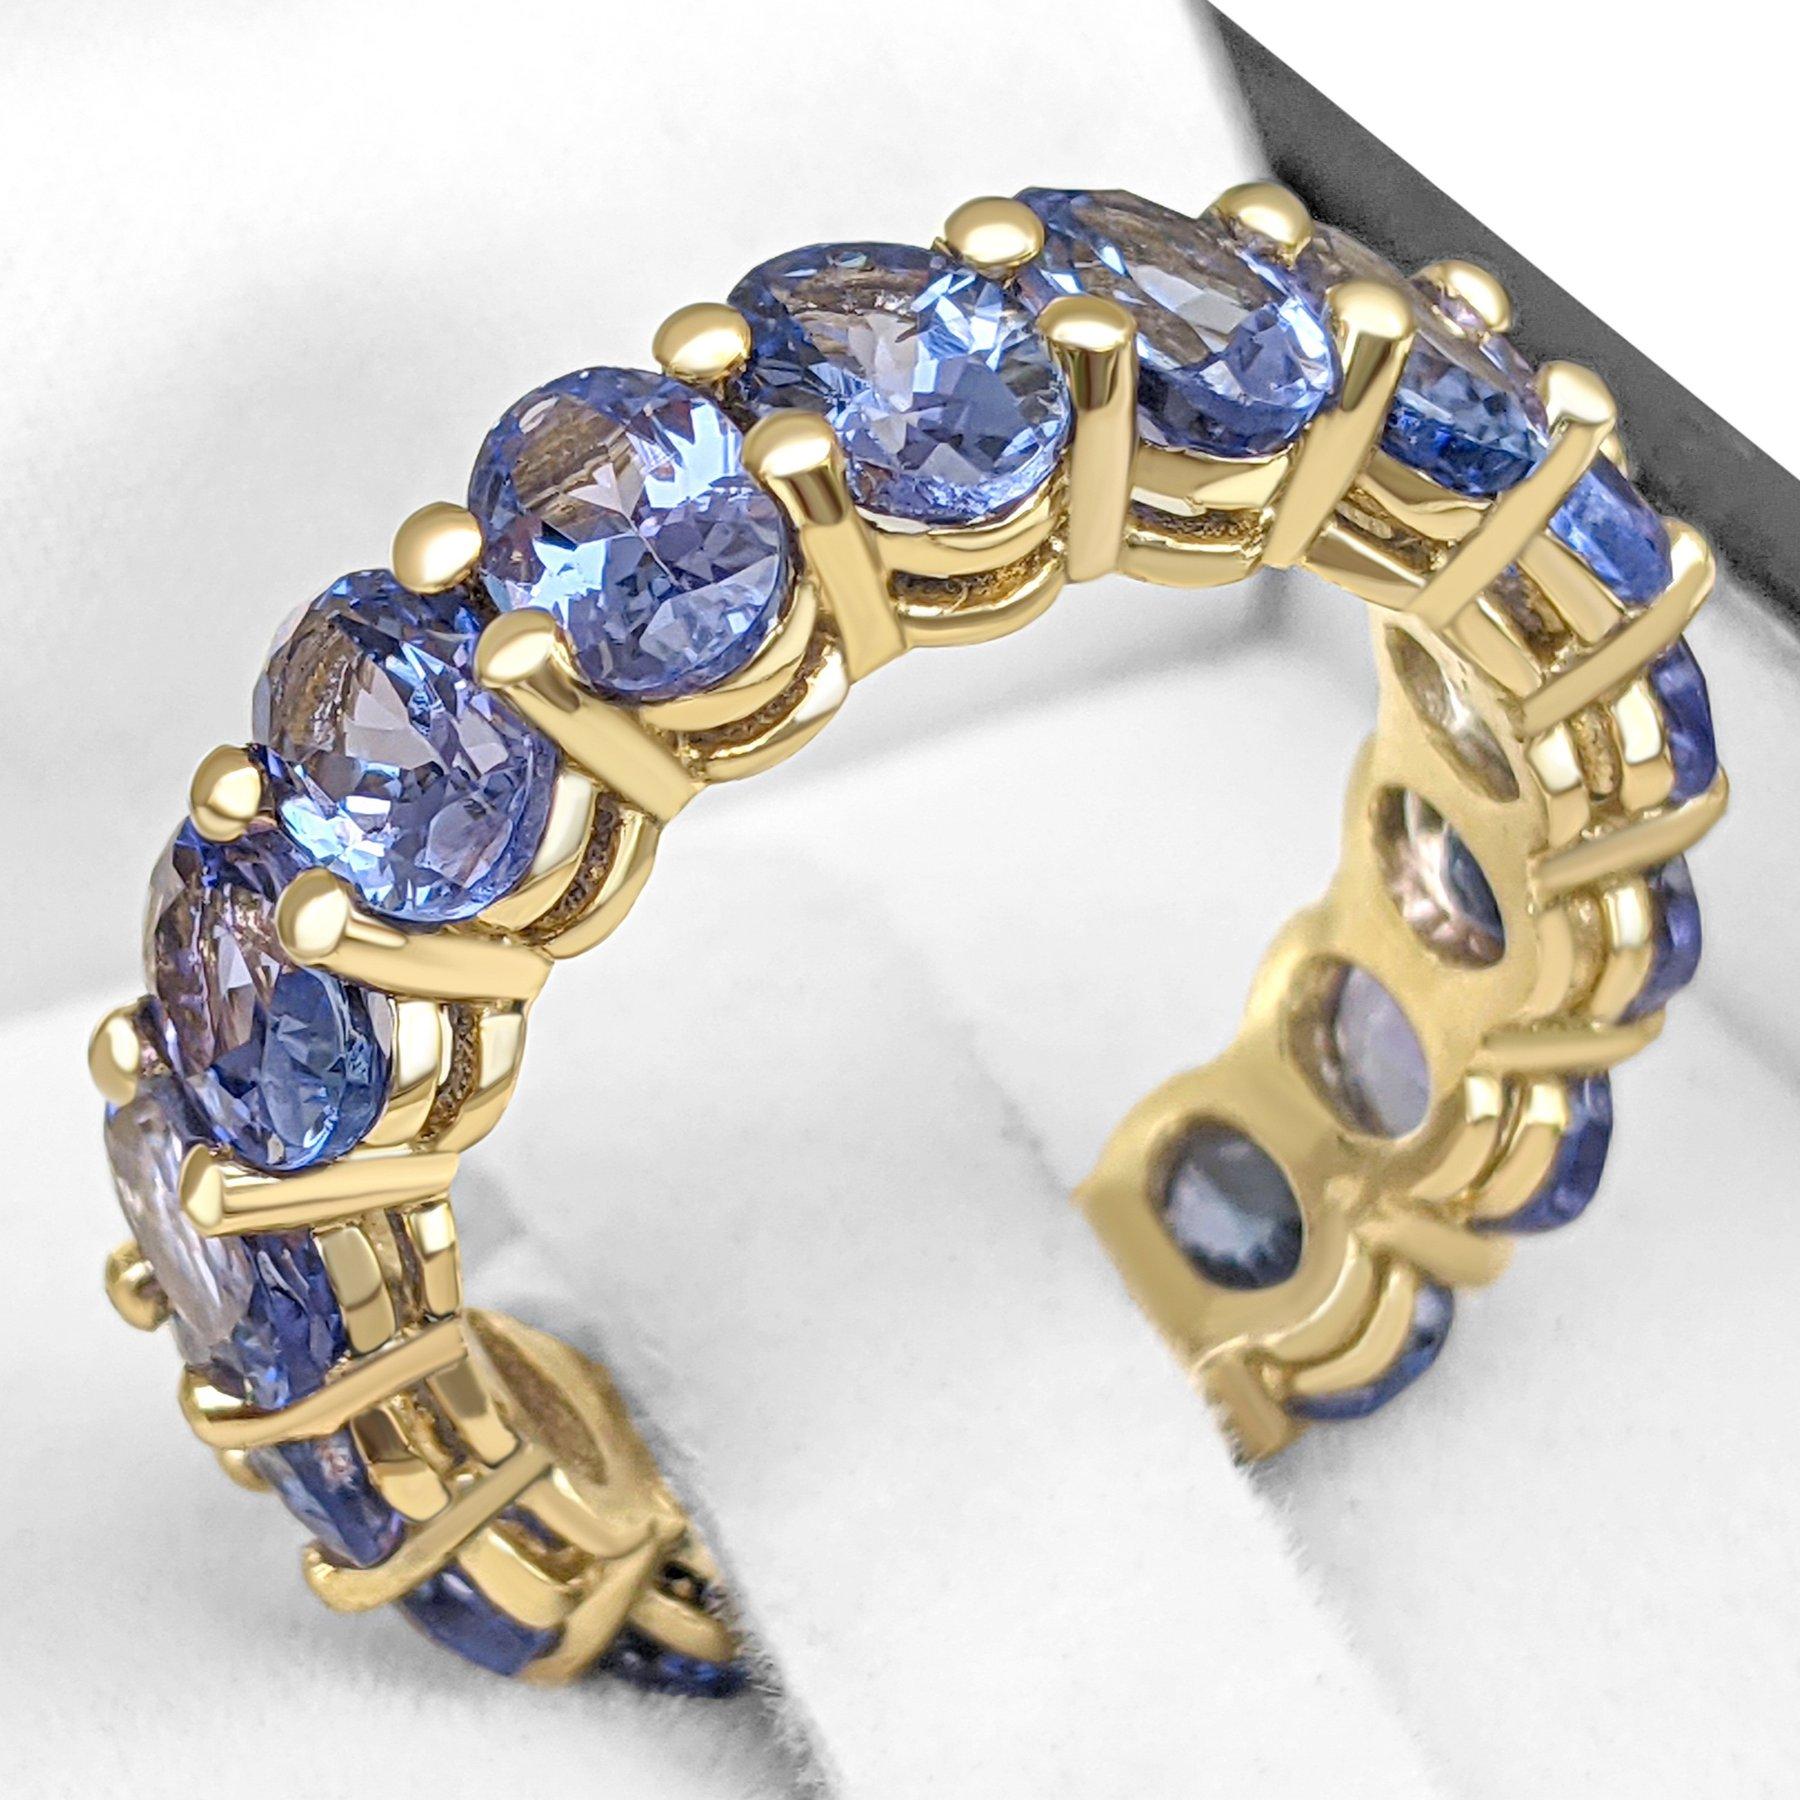 Oval Cut NO RESERVE! 8.18 Carat Tanzanite Eternity Band - 14 kt. Yellow Gold - Ring For Sale